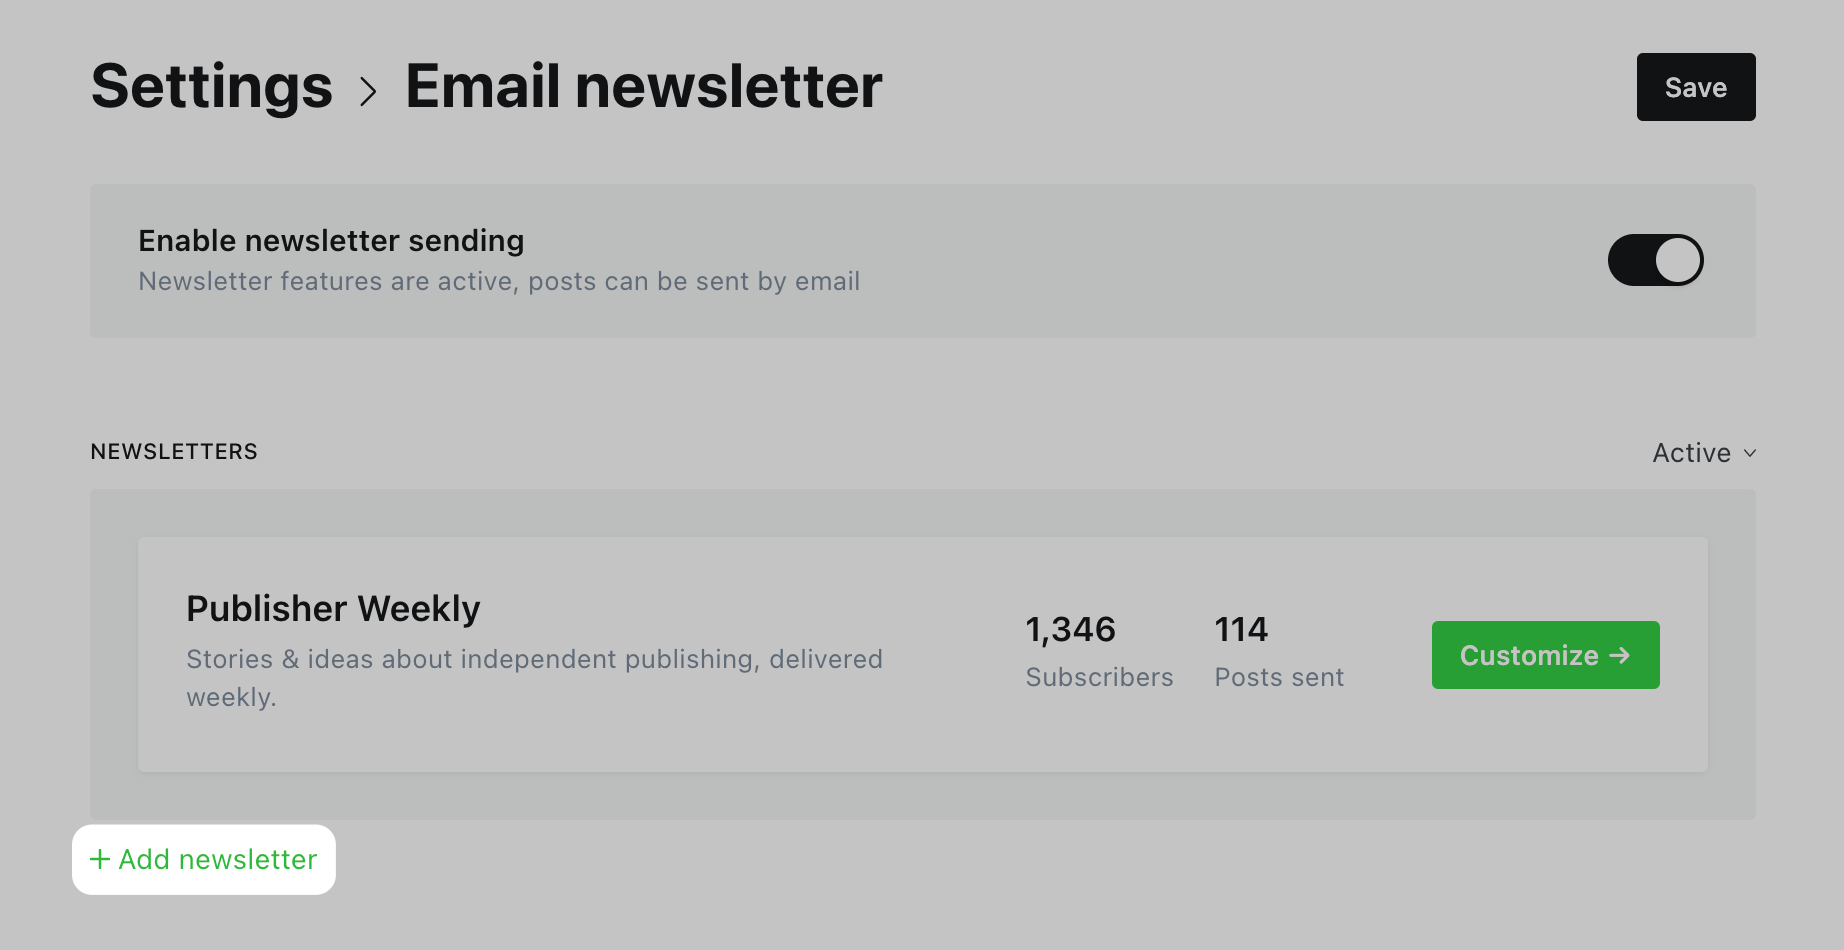 Email newsletter settings screen, focus on the "Add newsletter" button